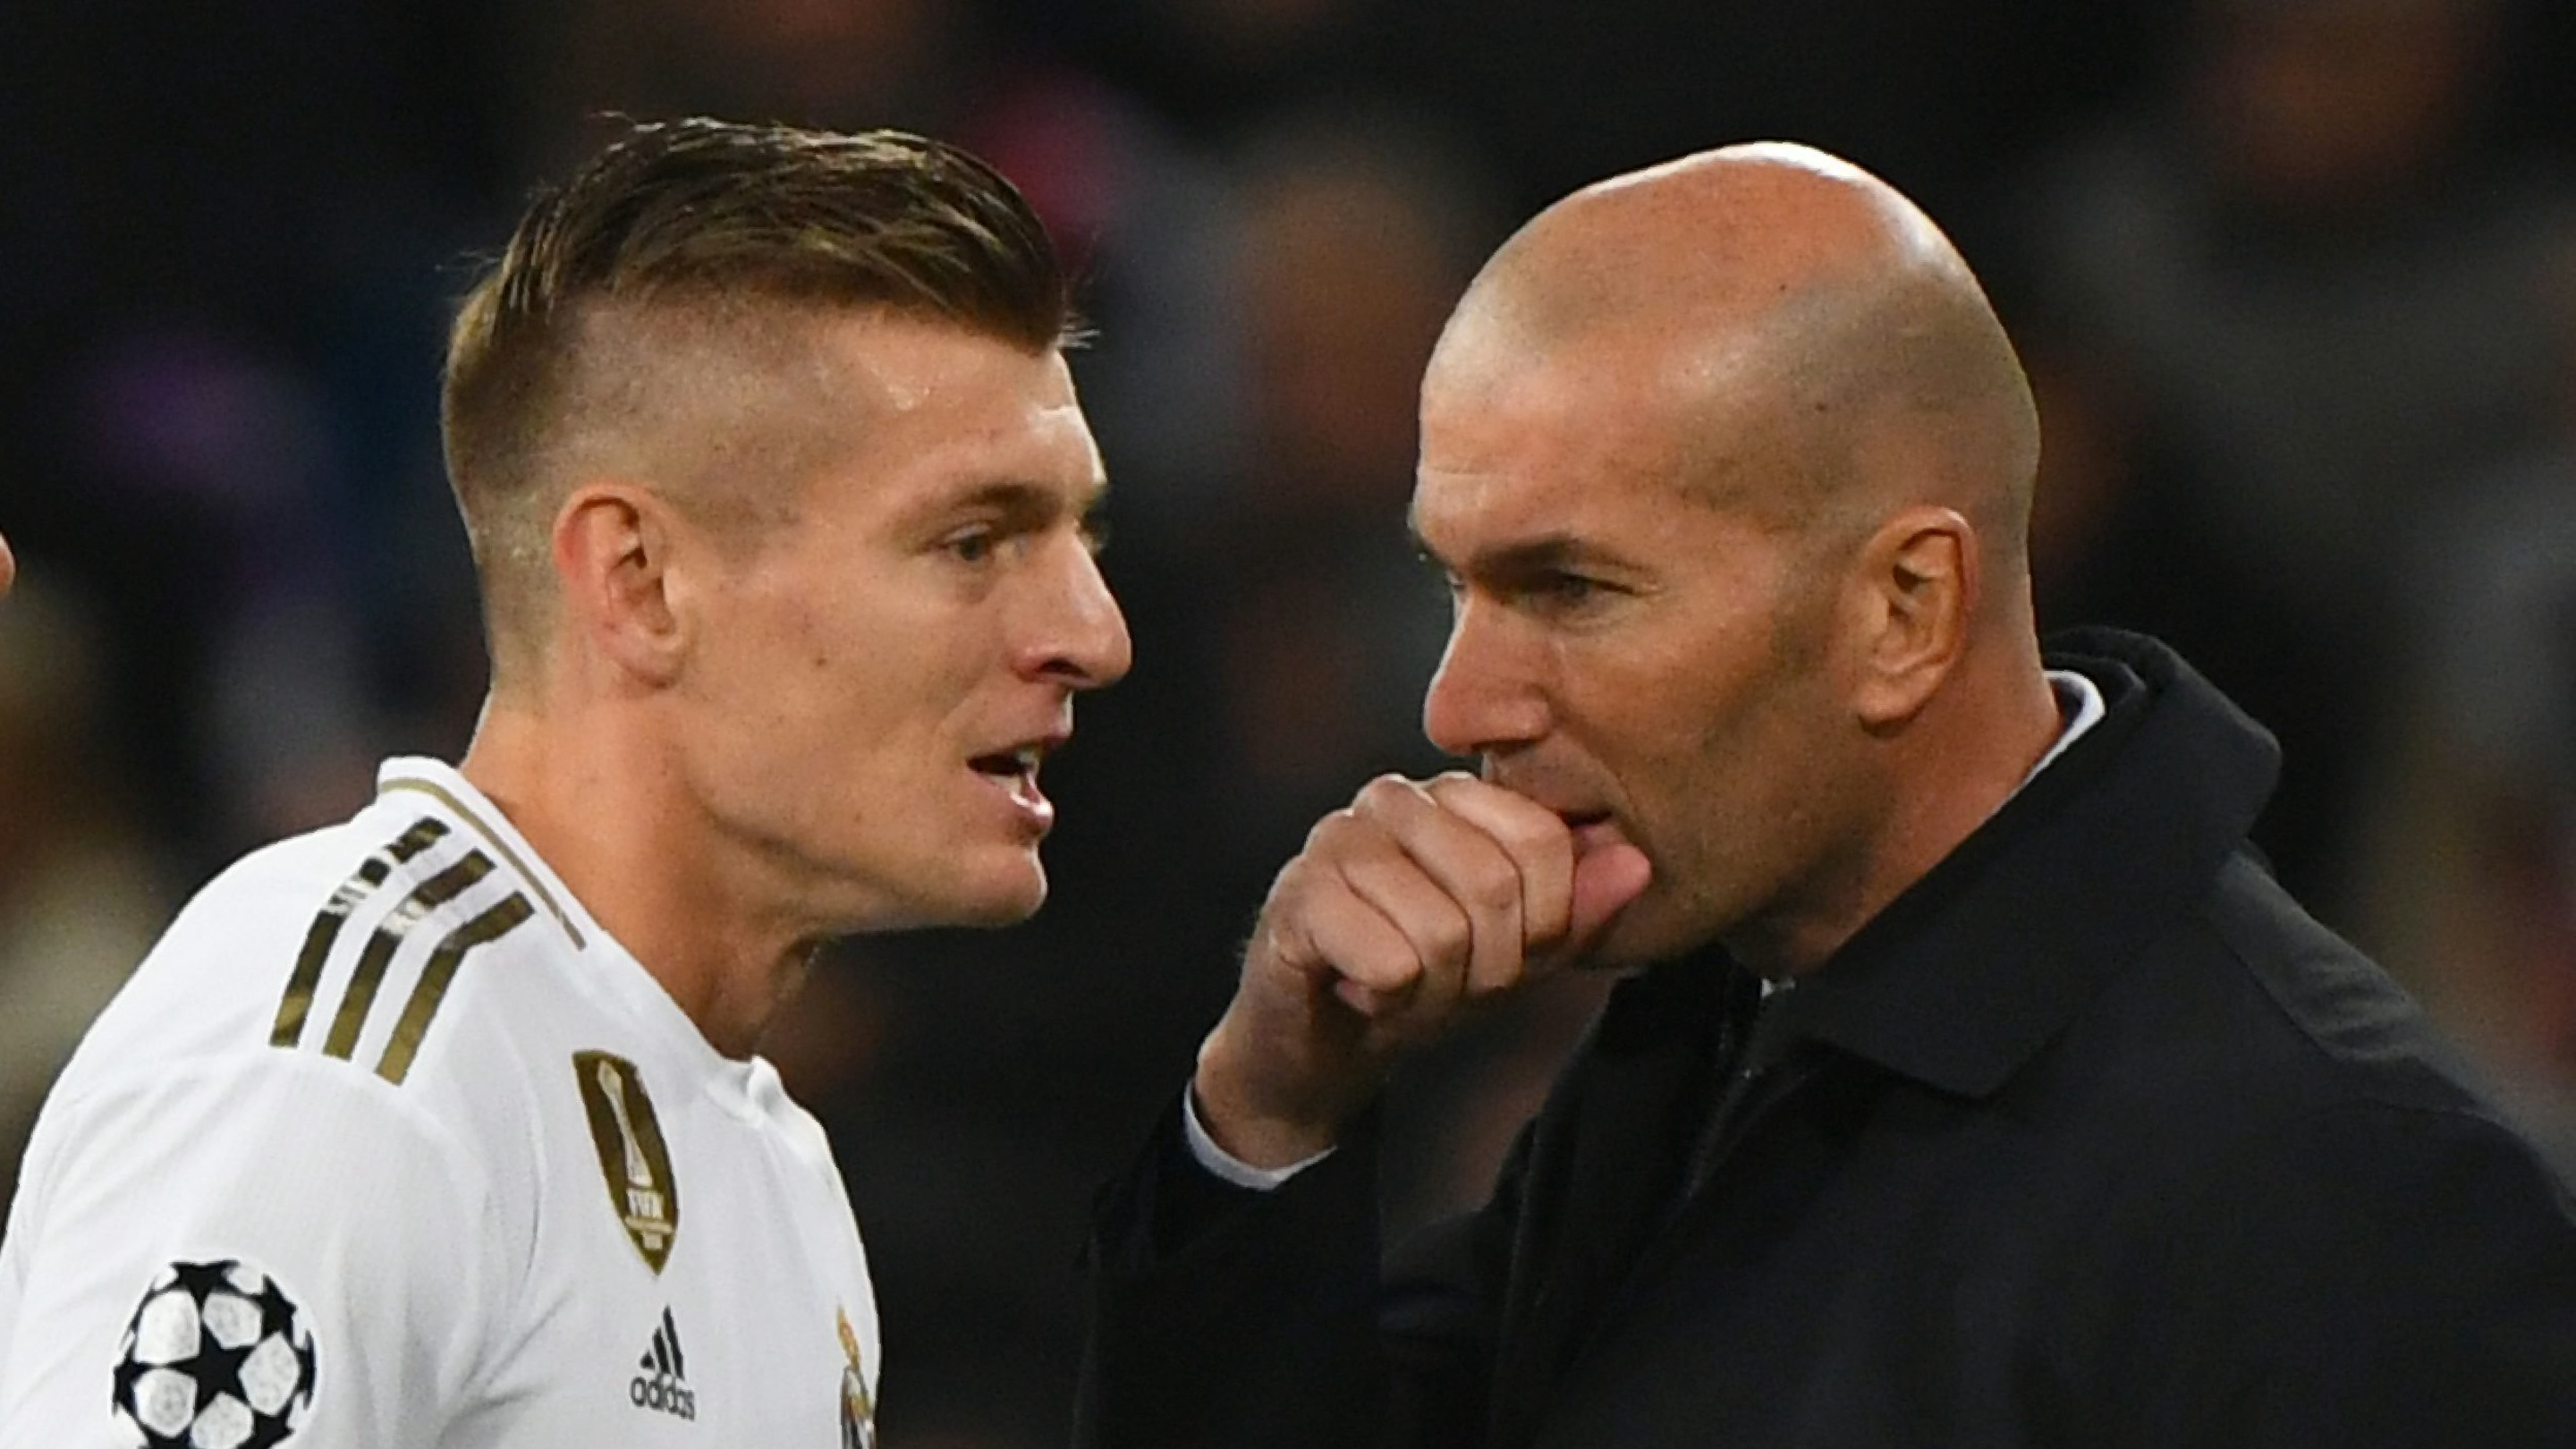 Toni Kroos reveals outrageous plan to play with Zinedine Zidane in Real Madrid legends games